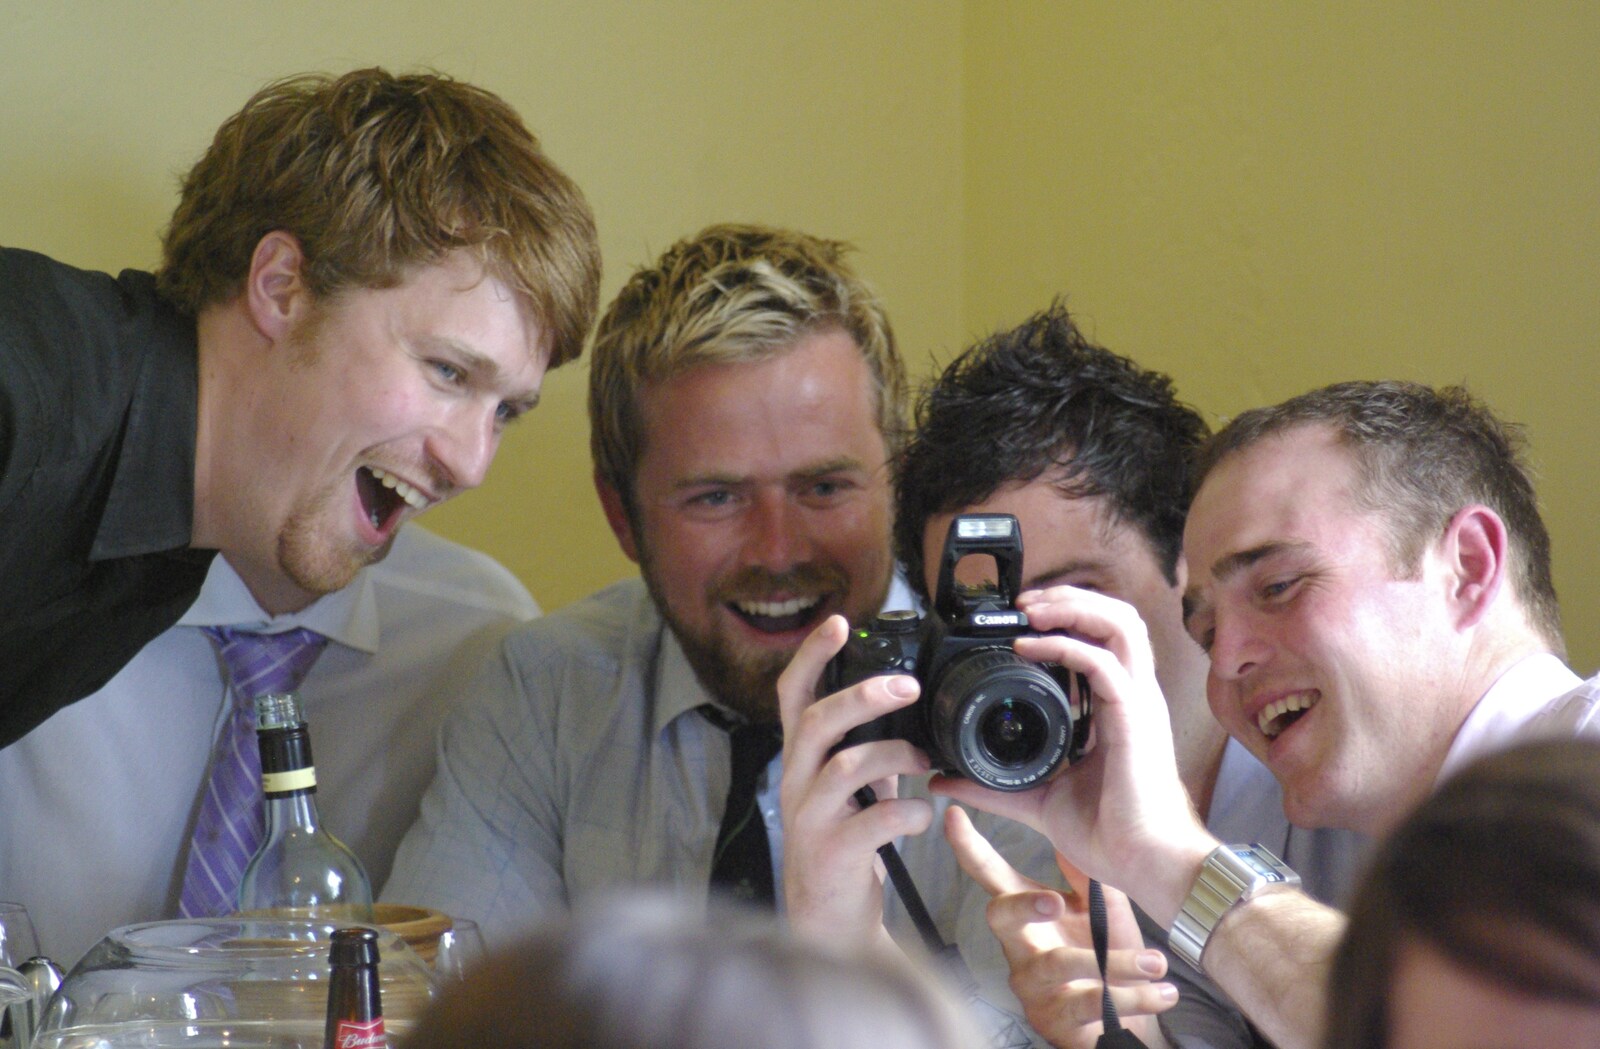 Some digital camera photos are reviewed from Julie and Cameron's Wedding, Ballintaggart House, Dingle - 24th July 2009